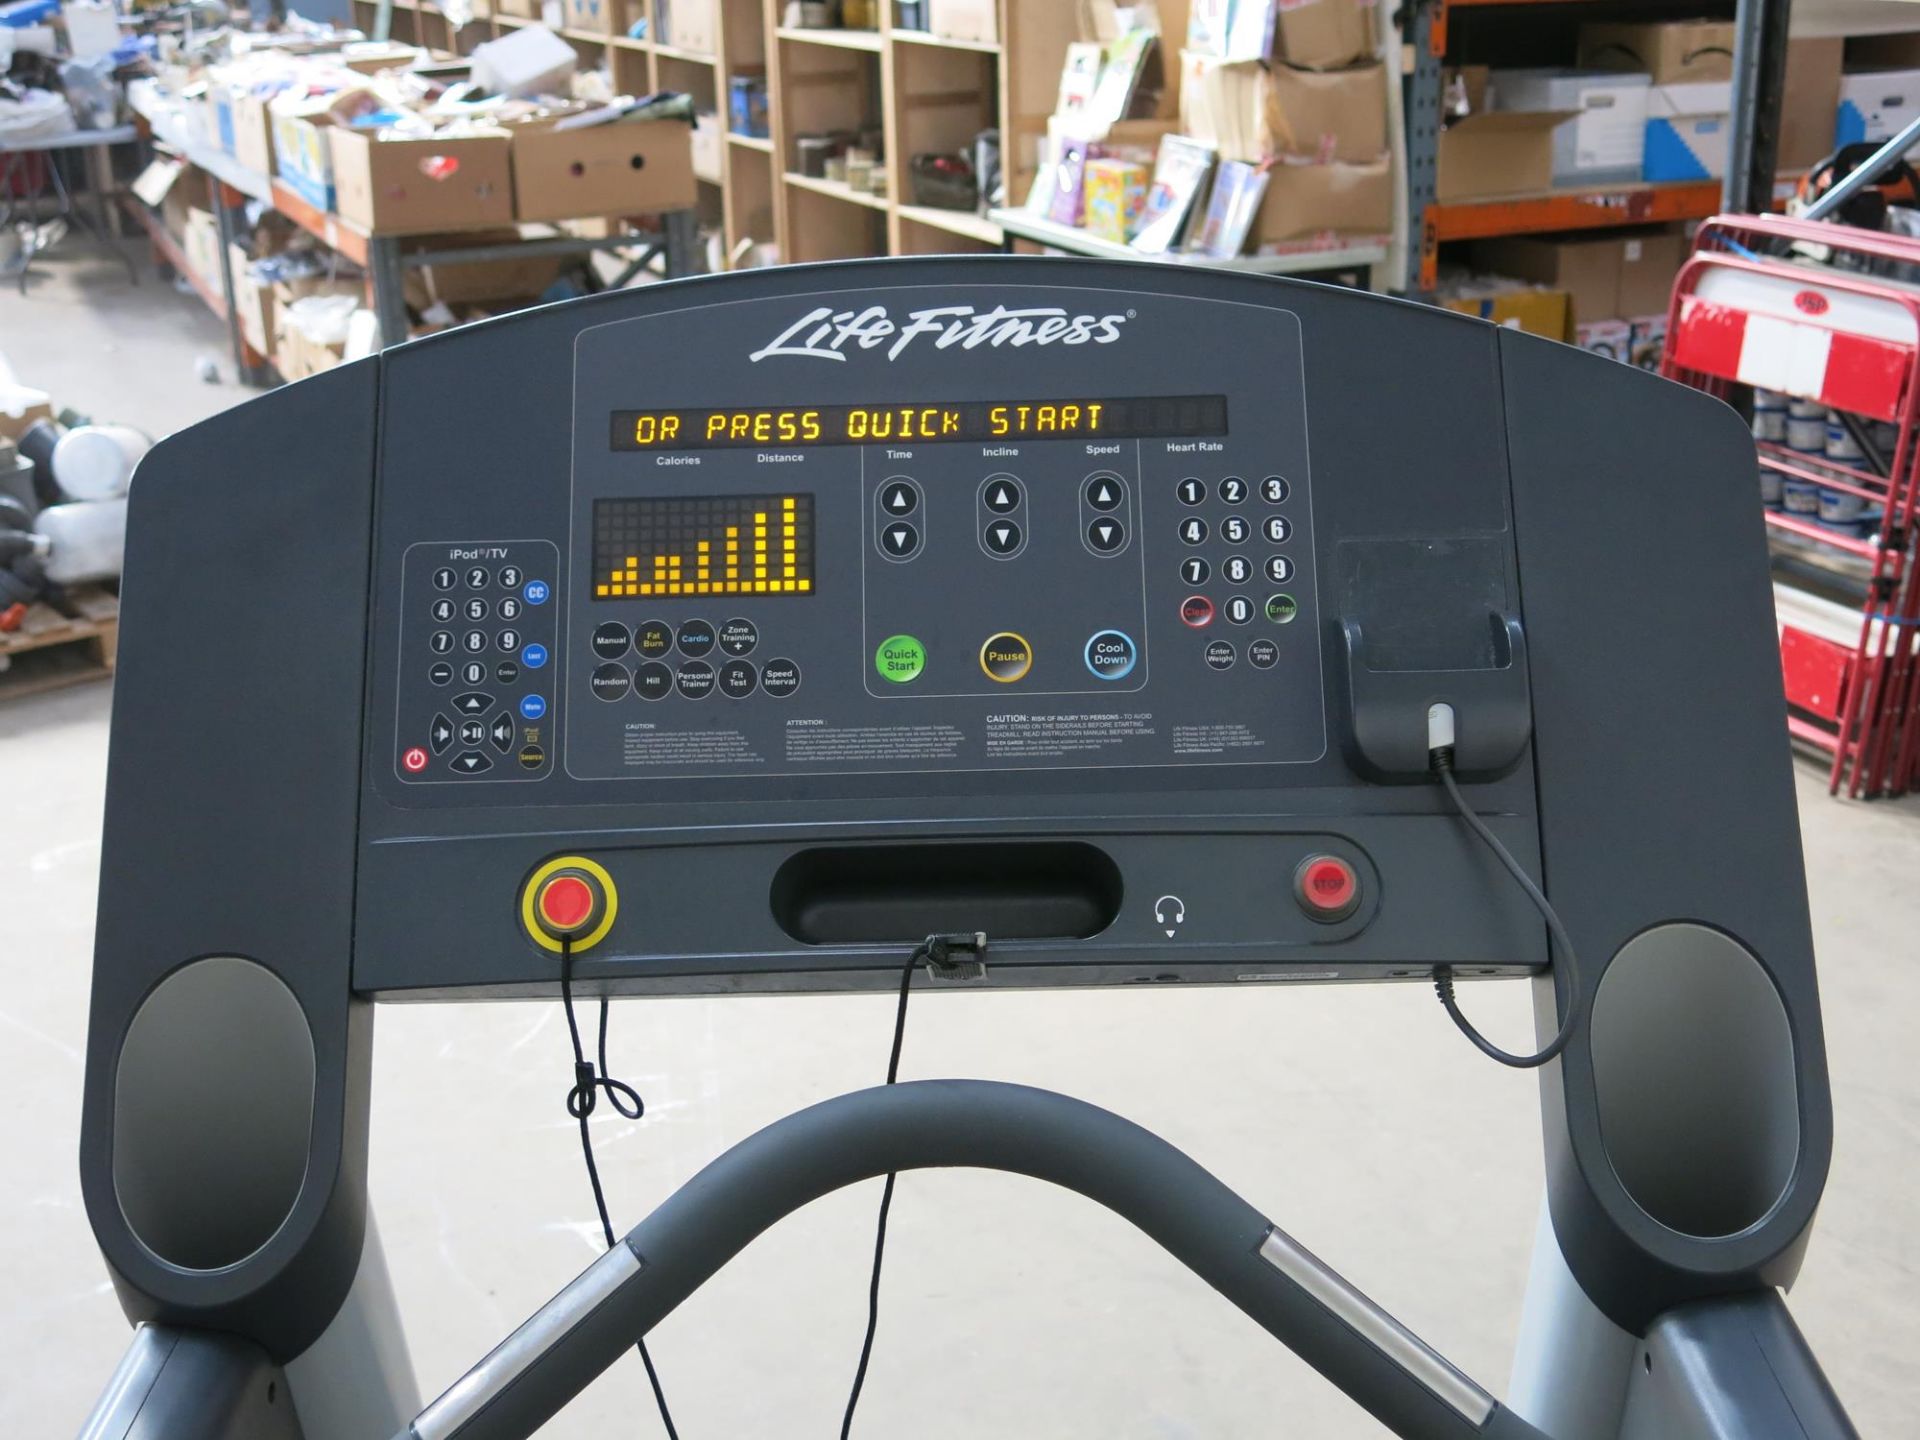 * A Life Fitness CLSTINHXK Treadmill, YOM 2013, complete with iPod docking station, incline/ - Image 2 of 3